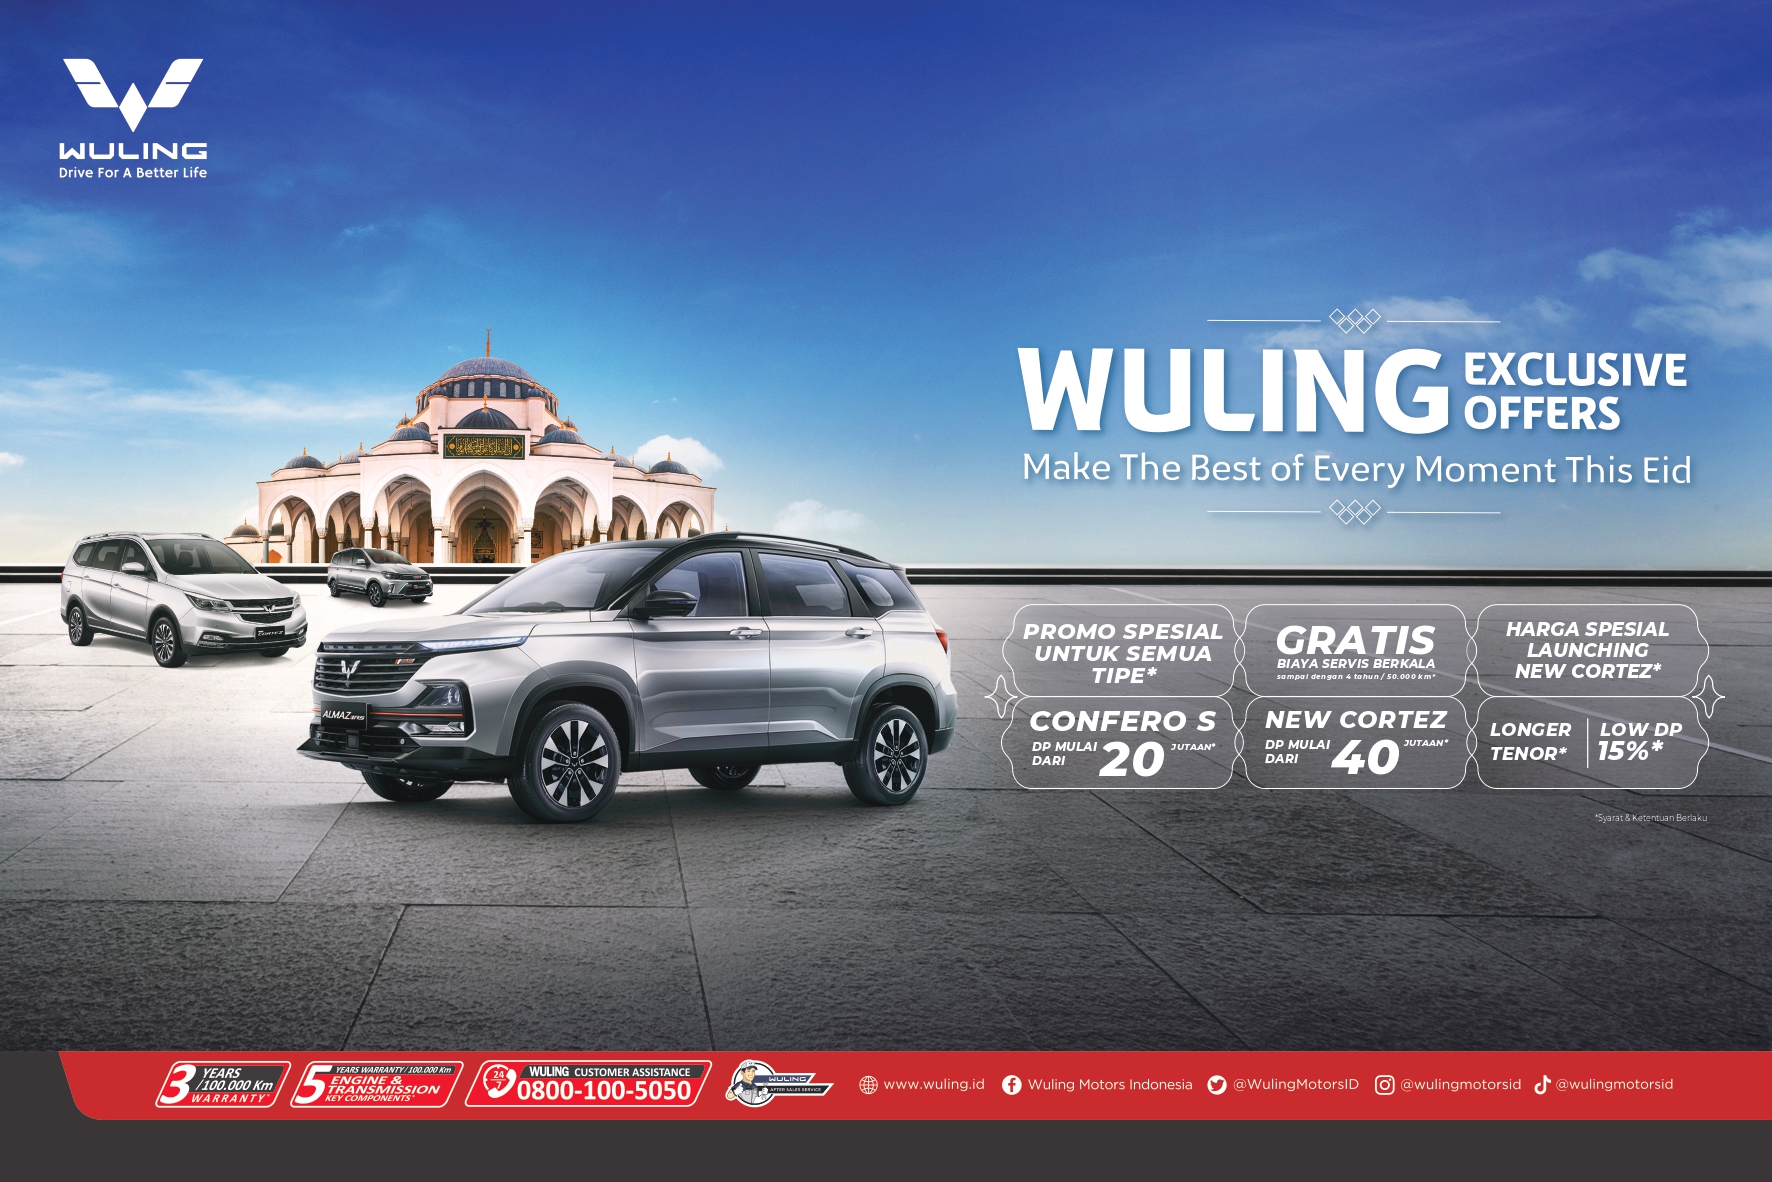 Image Wuling Presents Various Special Promos This Month through ‘Wuling Exclusive Offers’